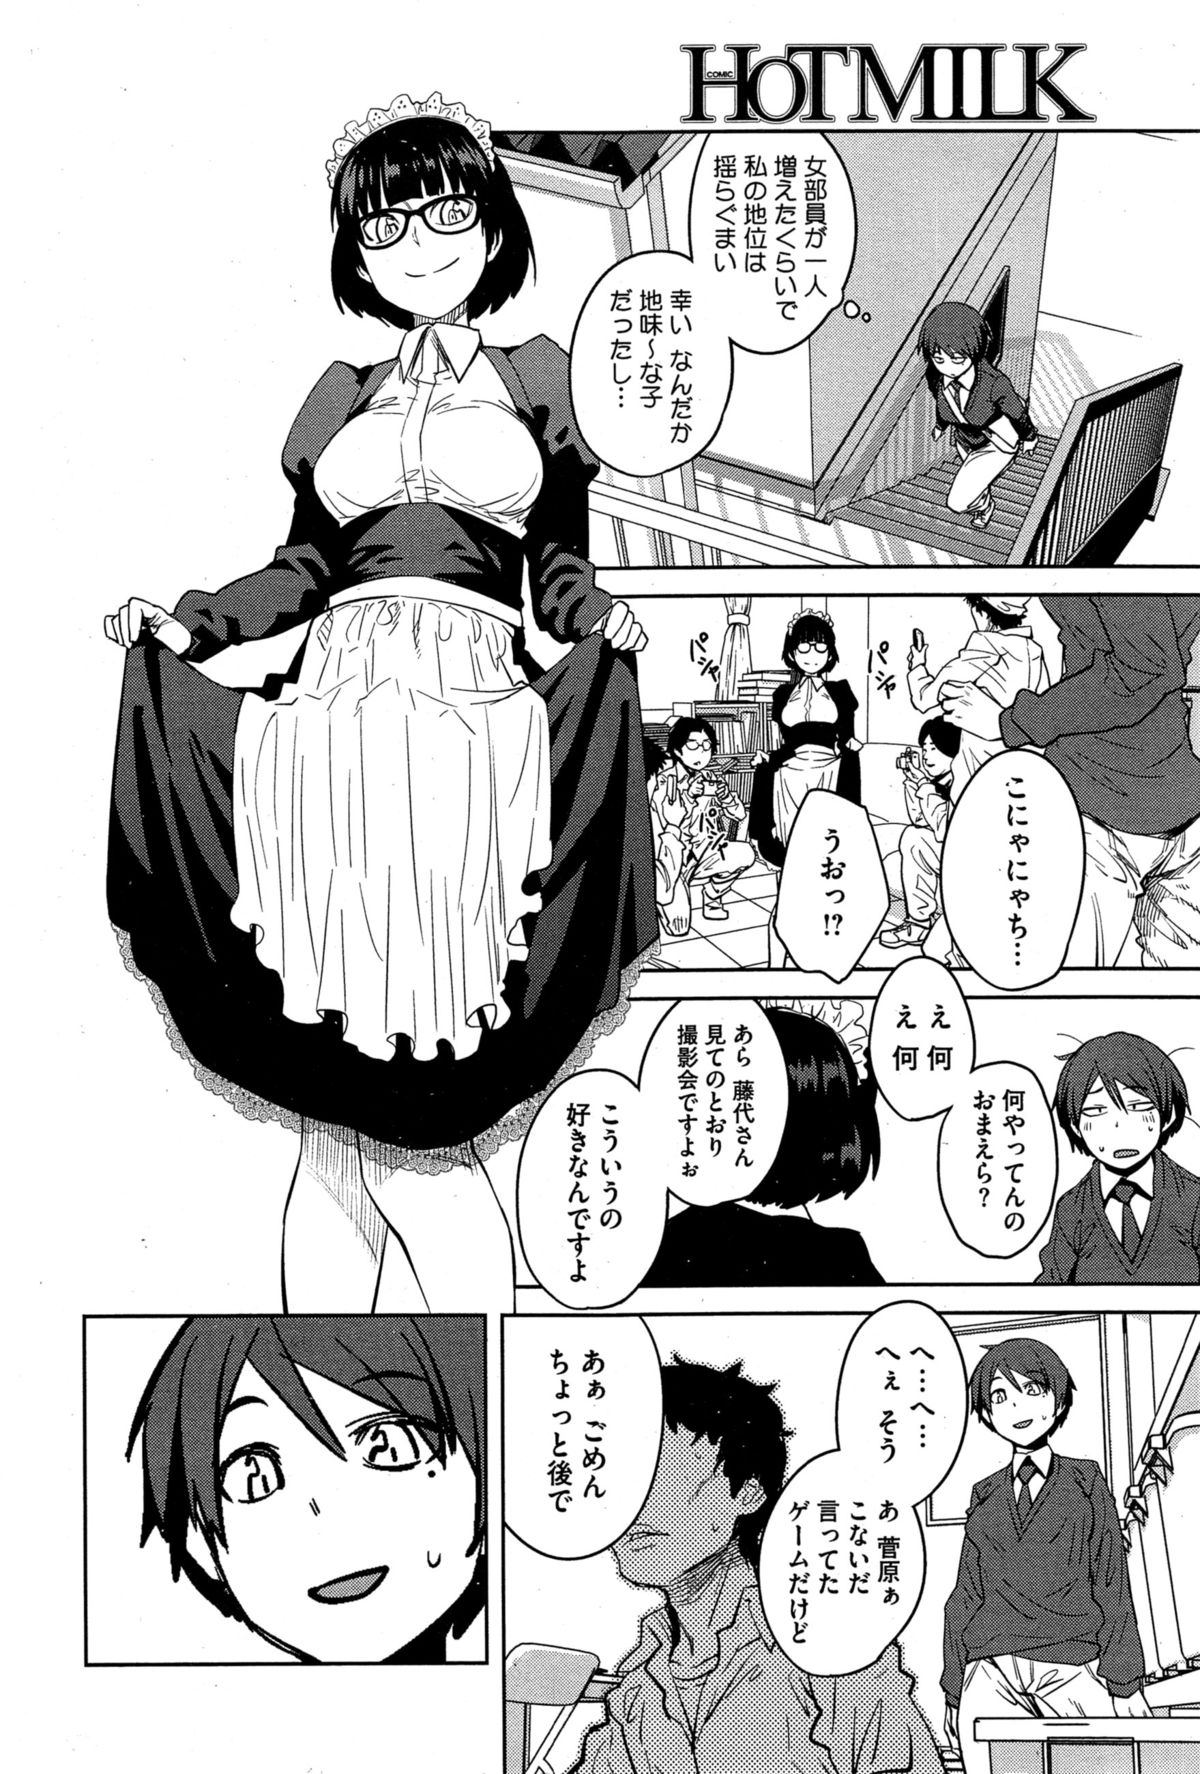 [Shimimaru] Joou Series | Queen Series Ch. 1-5 page 4 full